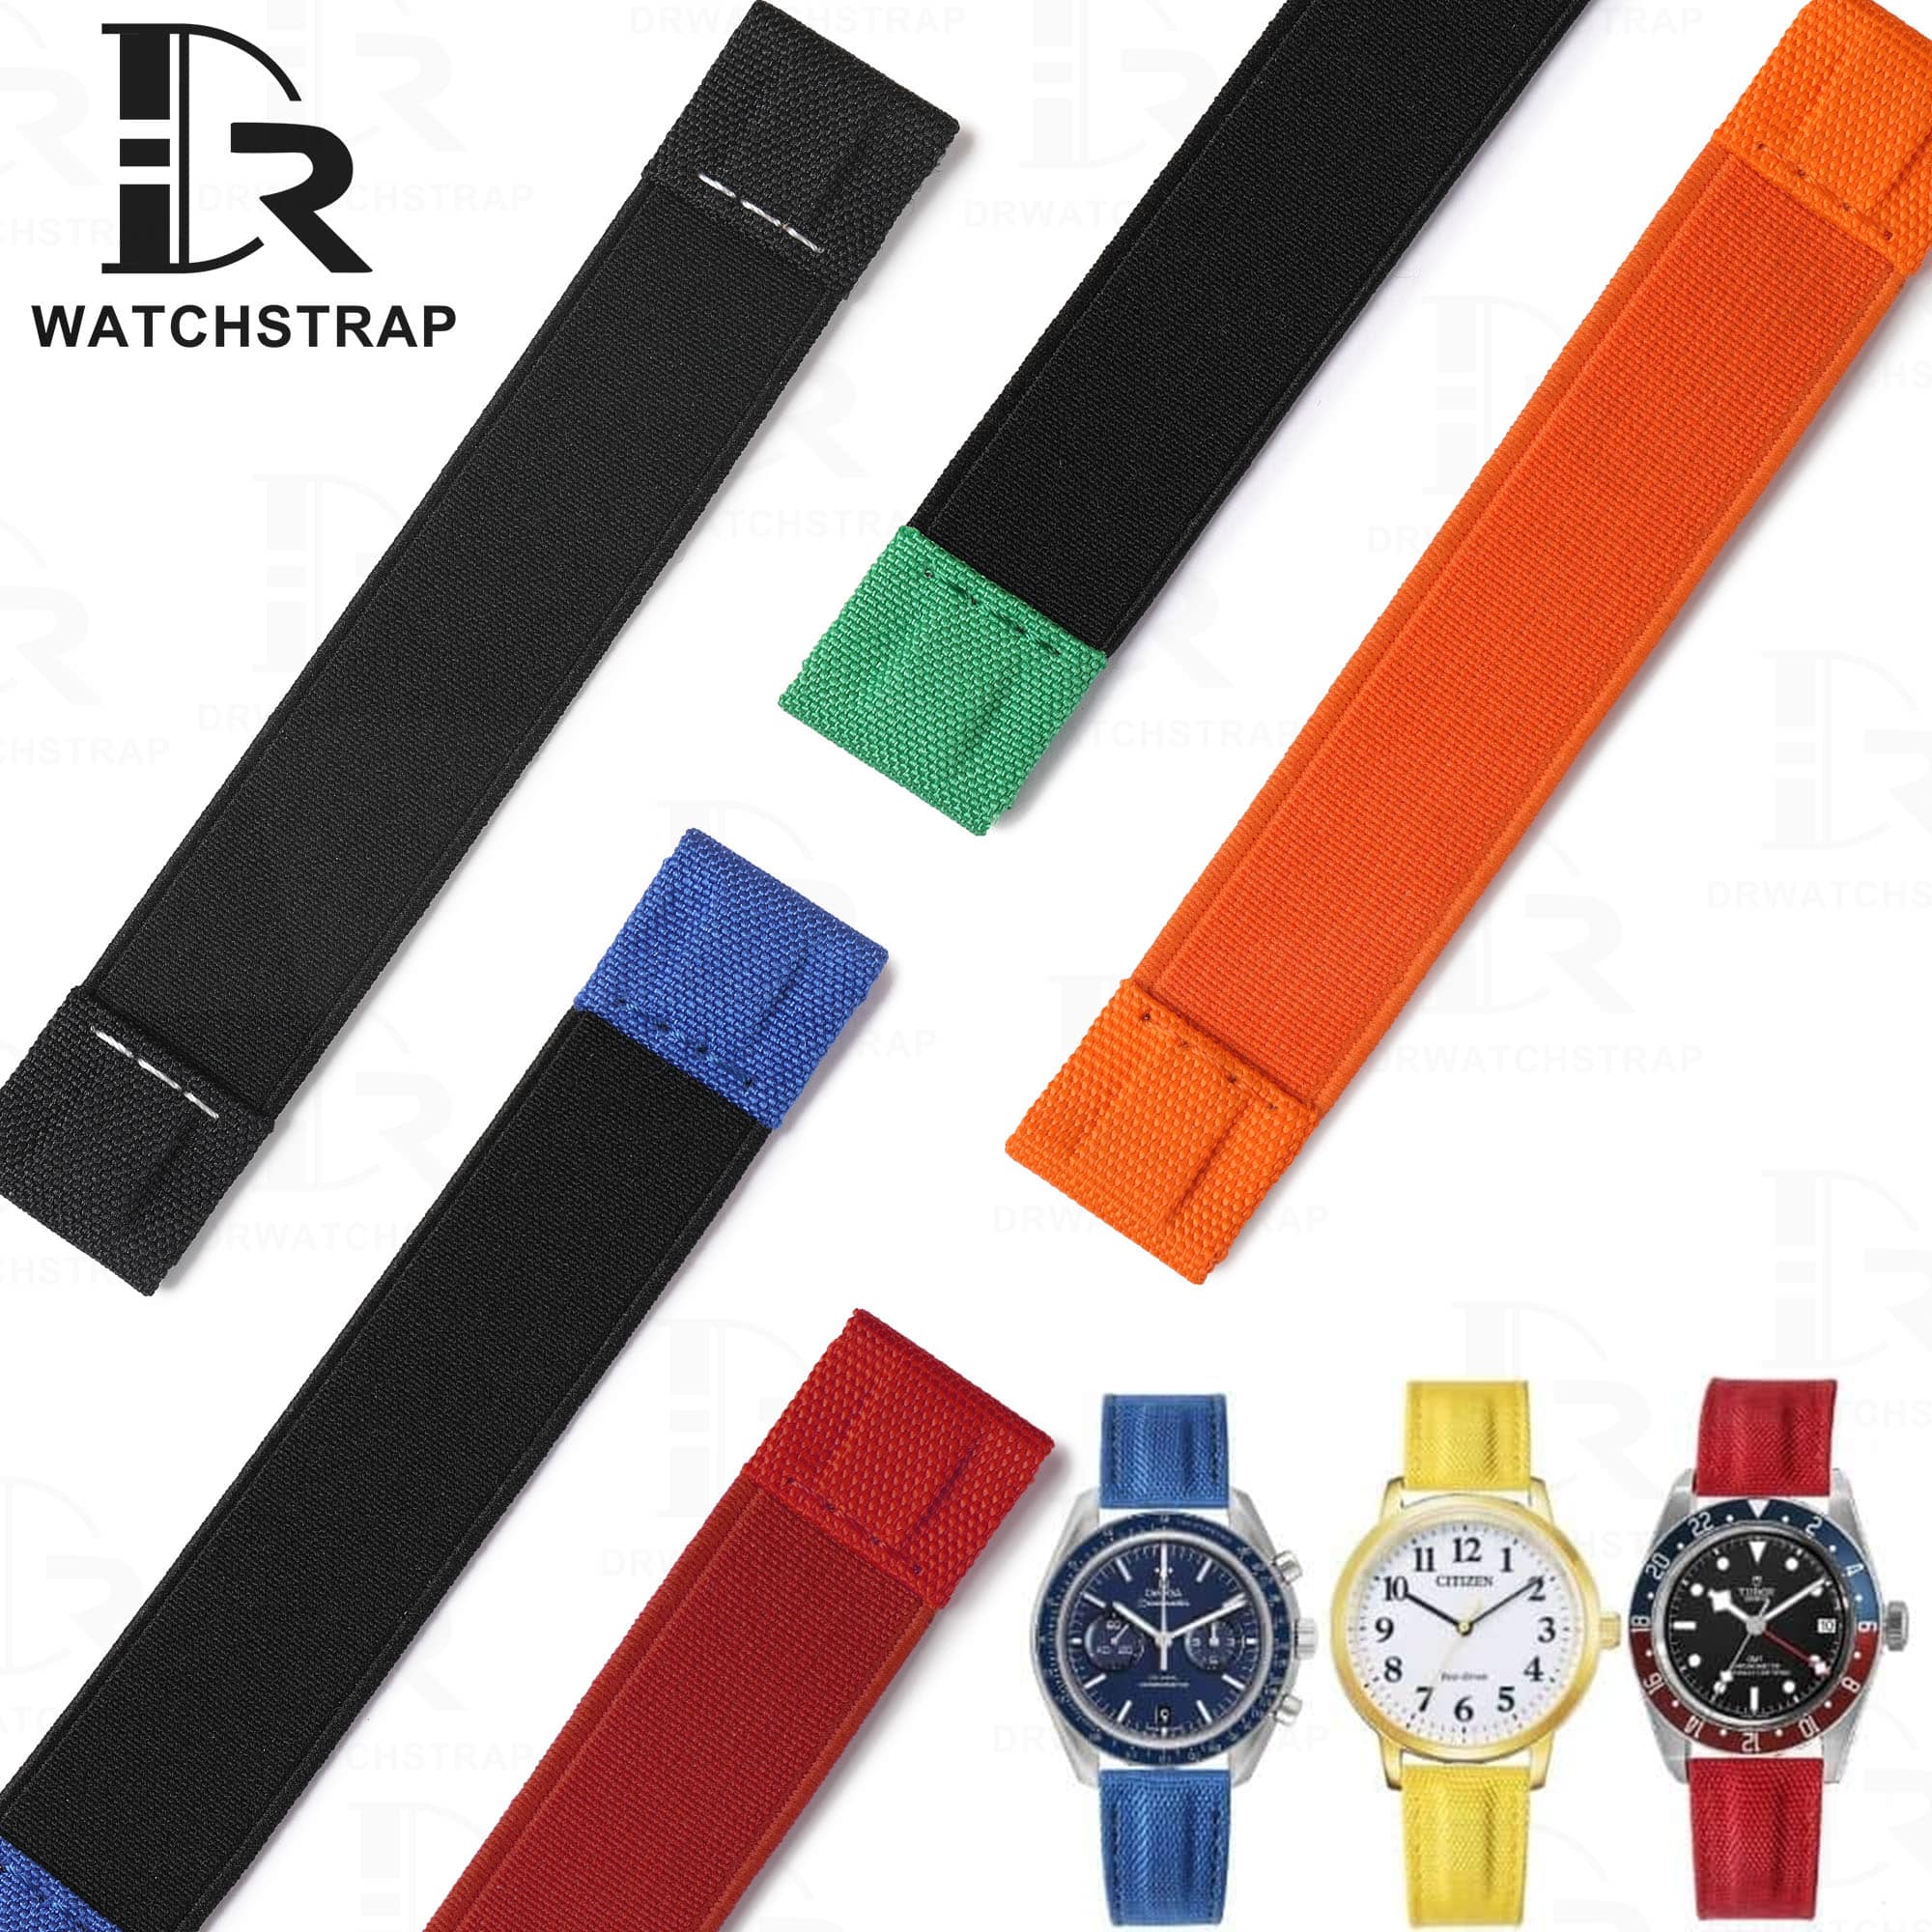 Custom handmade 20mm watch Elastic bands exercises bracelets black brown orange red canvas nylon best elastic watch strap exercise workout for Rolex Omega Blancpain Patek Philippe and more online for sale